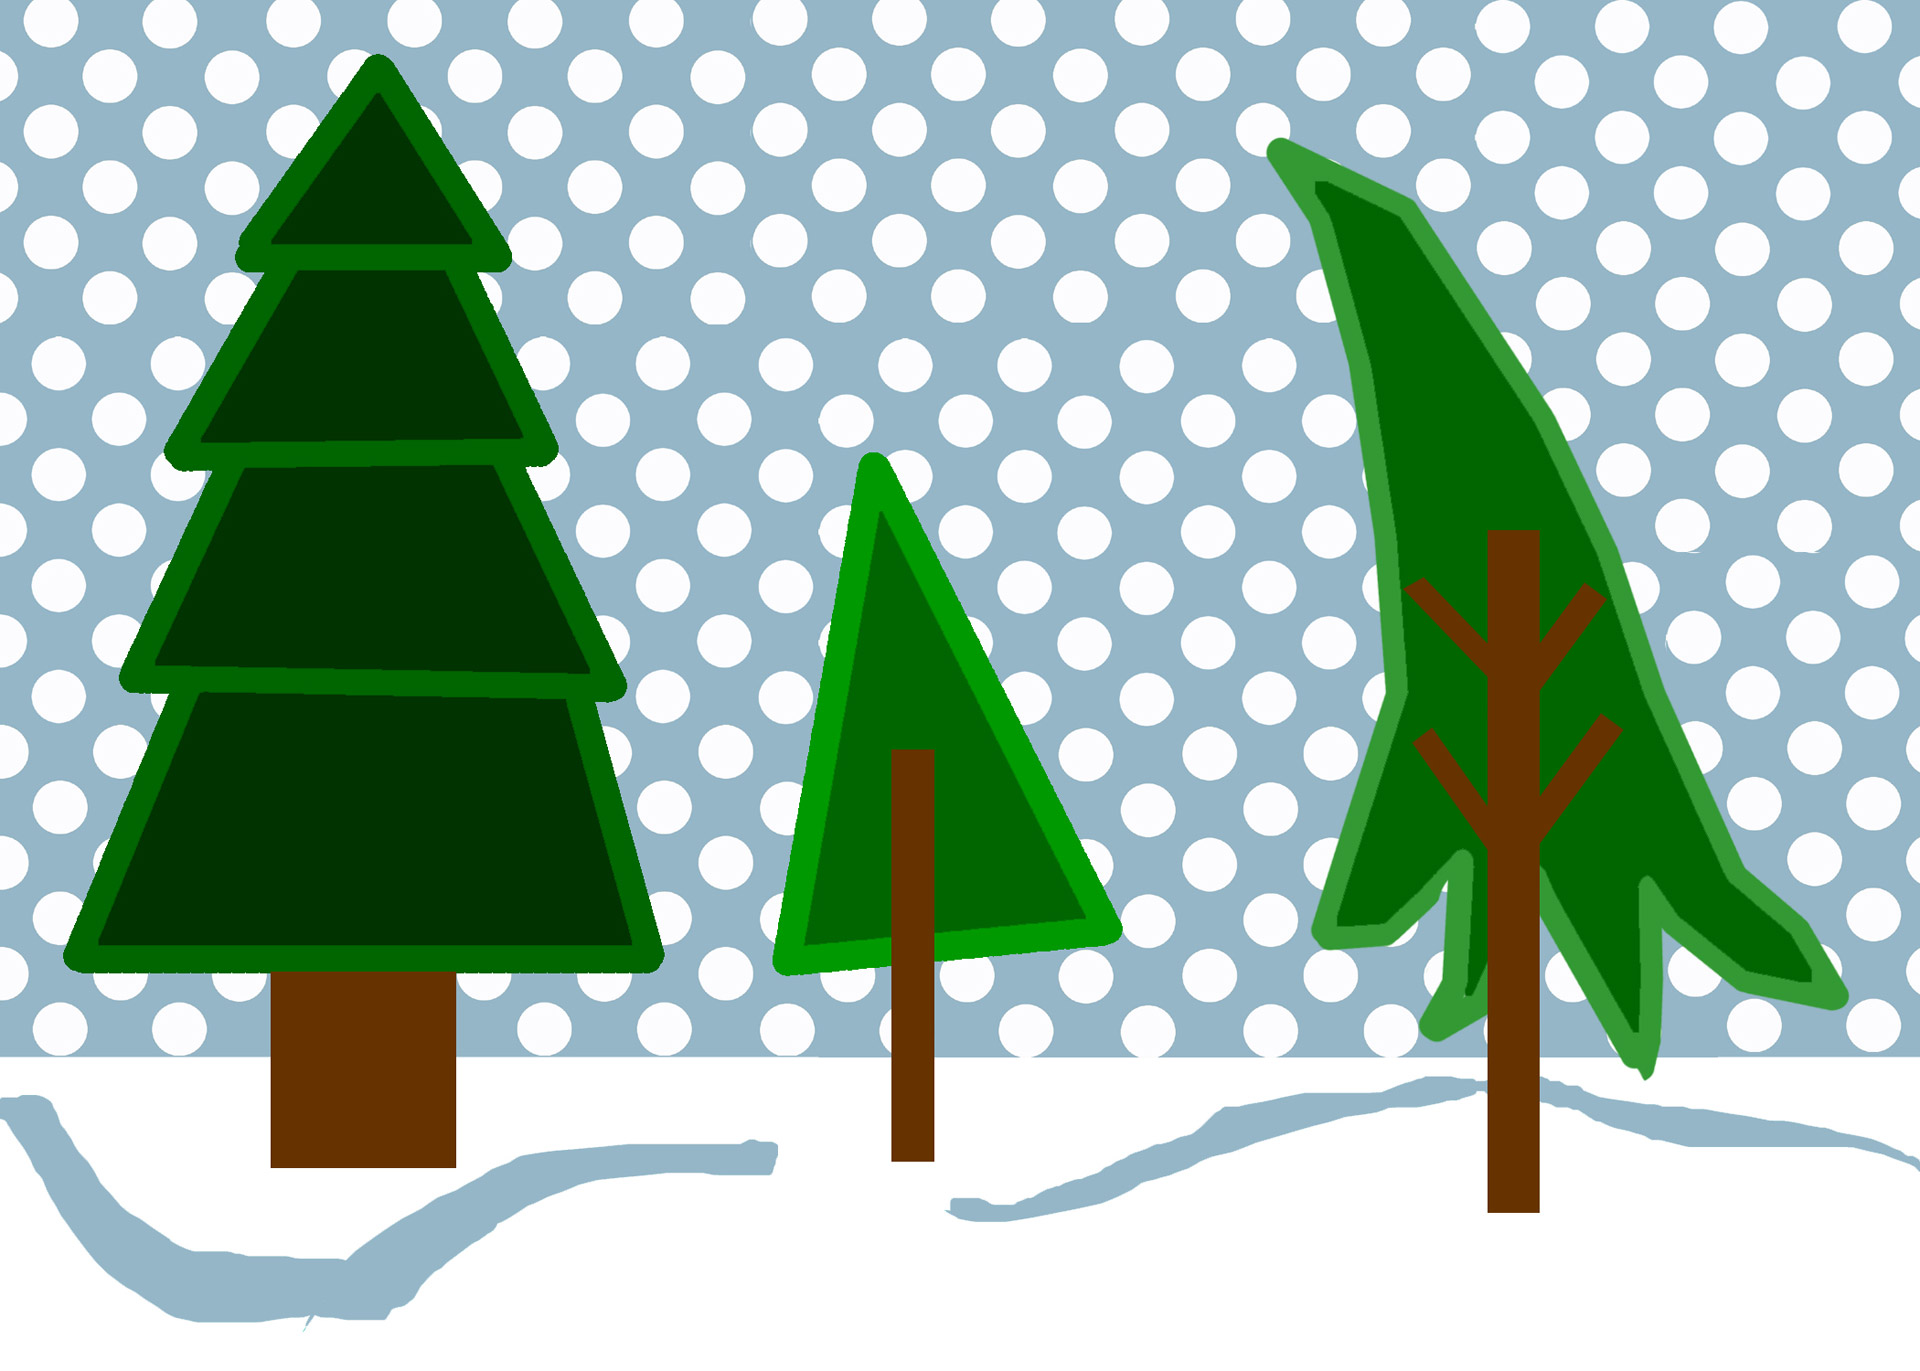 snowy woods clipart - photo #2